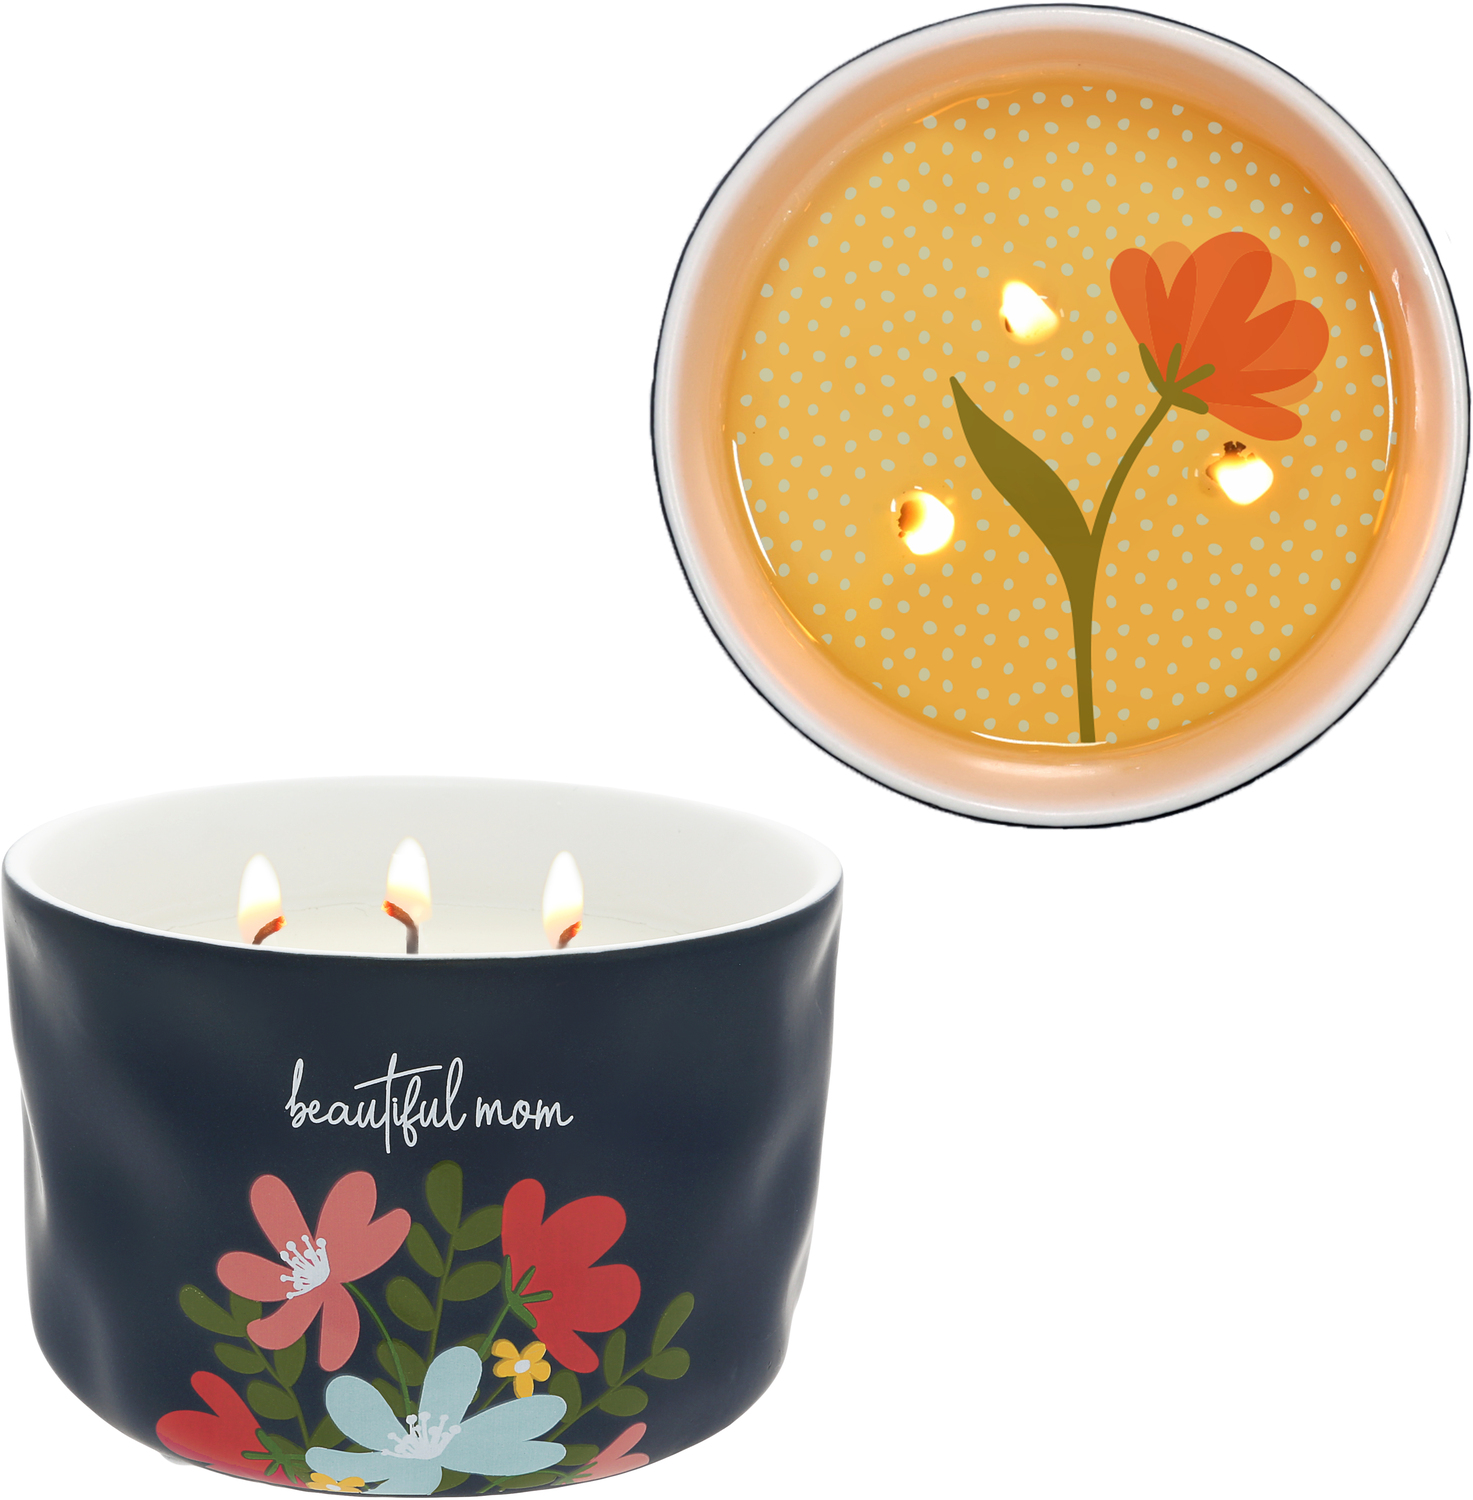 Beautiful Mom by Grateful Garden - Beautiful Mom - 12 oz - 100% Soy Wax Reveal Triple Wick Candle
Scent: Tranquility